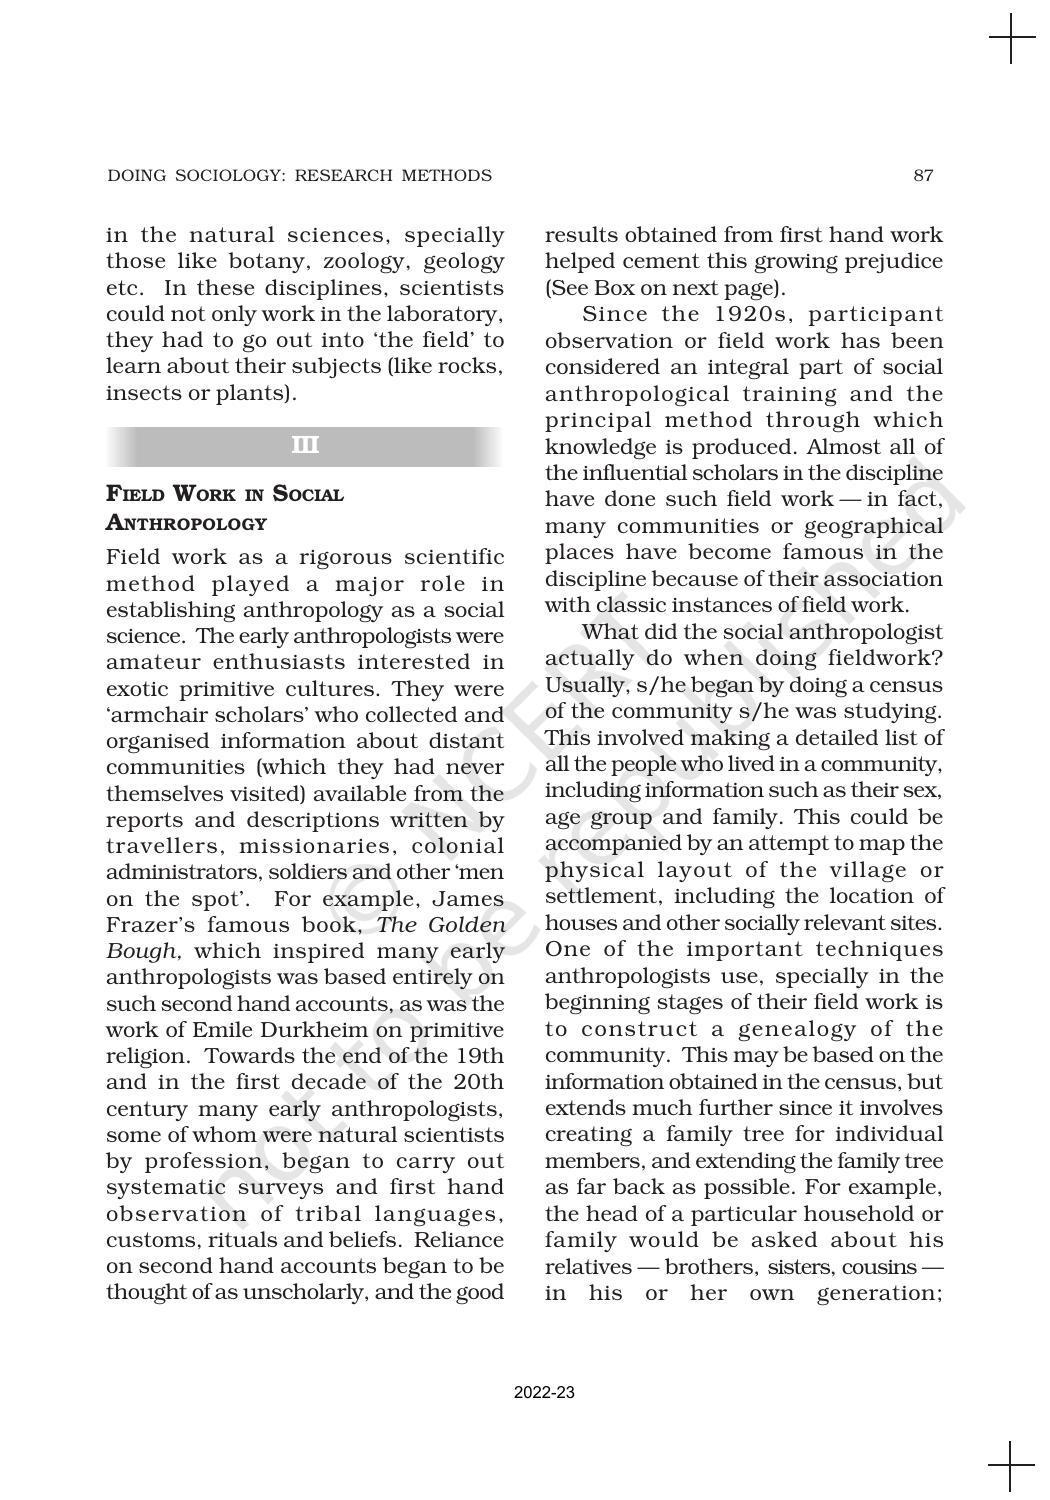 NCERT Book for Class 11 Sociology (Part-I) Chapter 5 Doing Sociology: Research Methods - Page 6